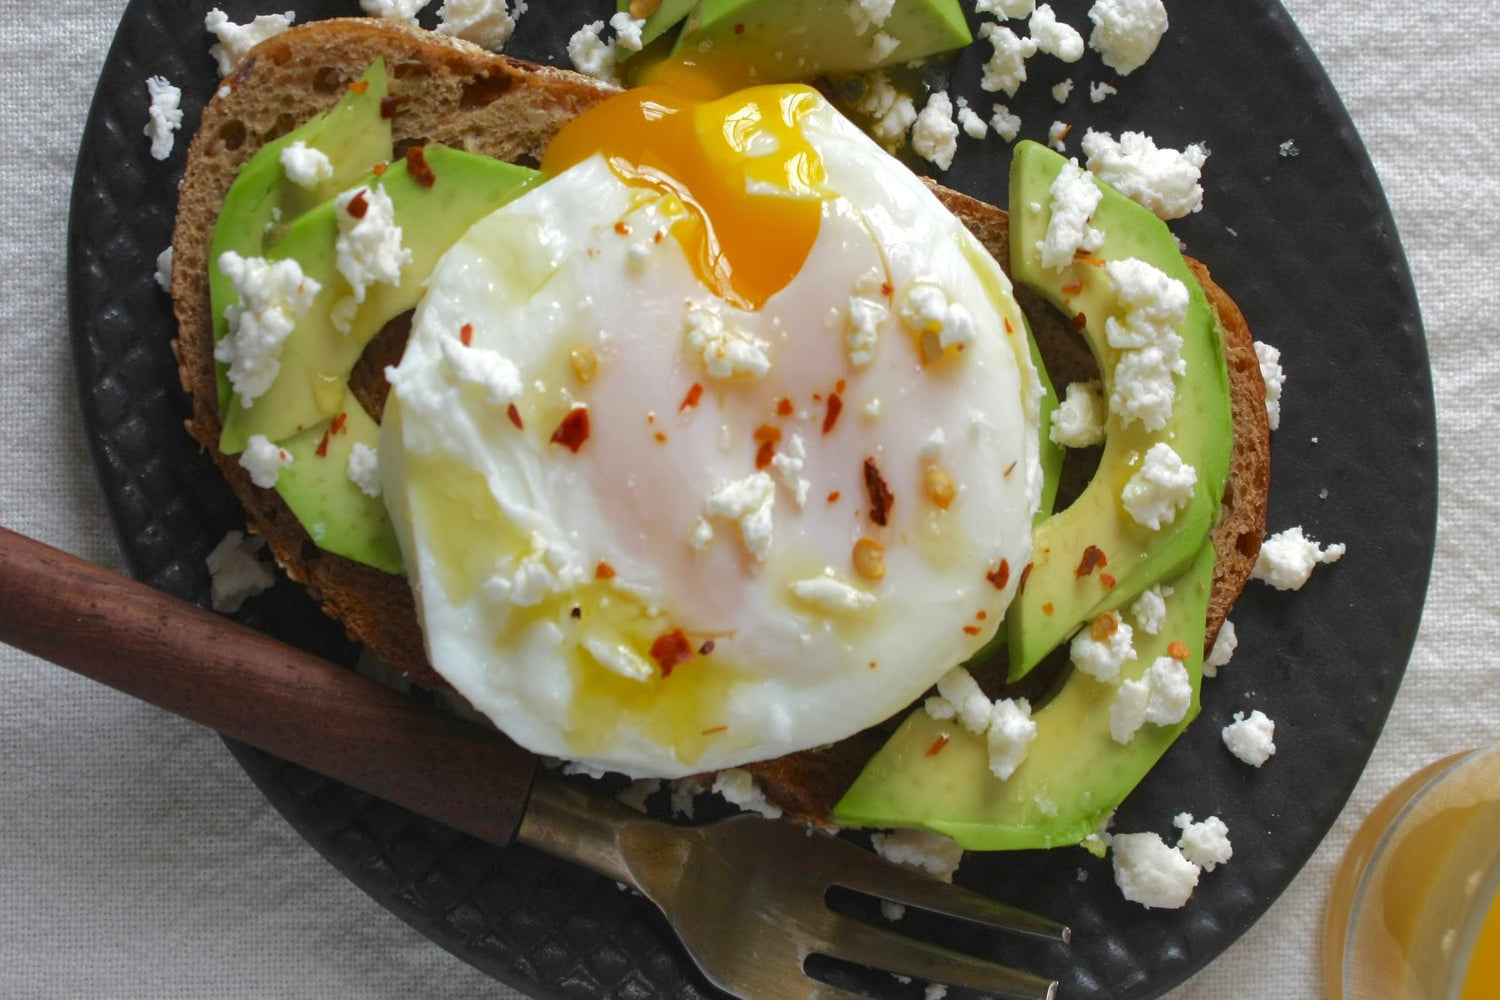 Kosterina's Avocado Toast with a Poached Egg & Crumbled Feta